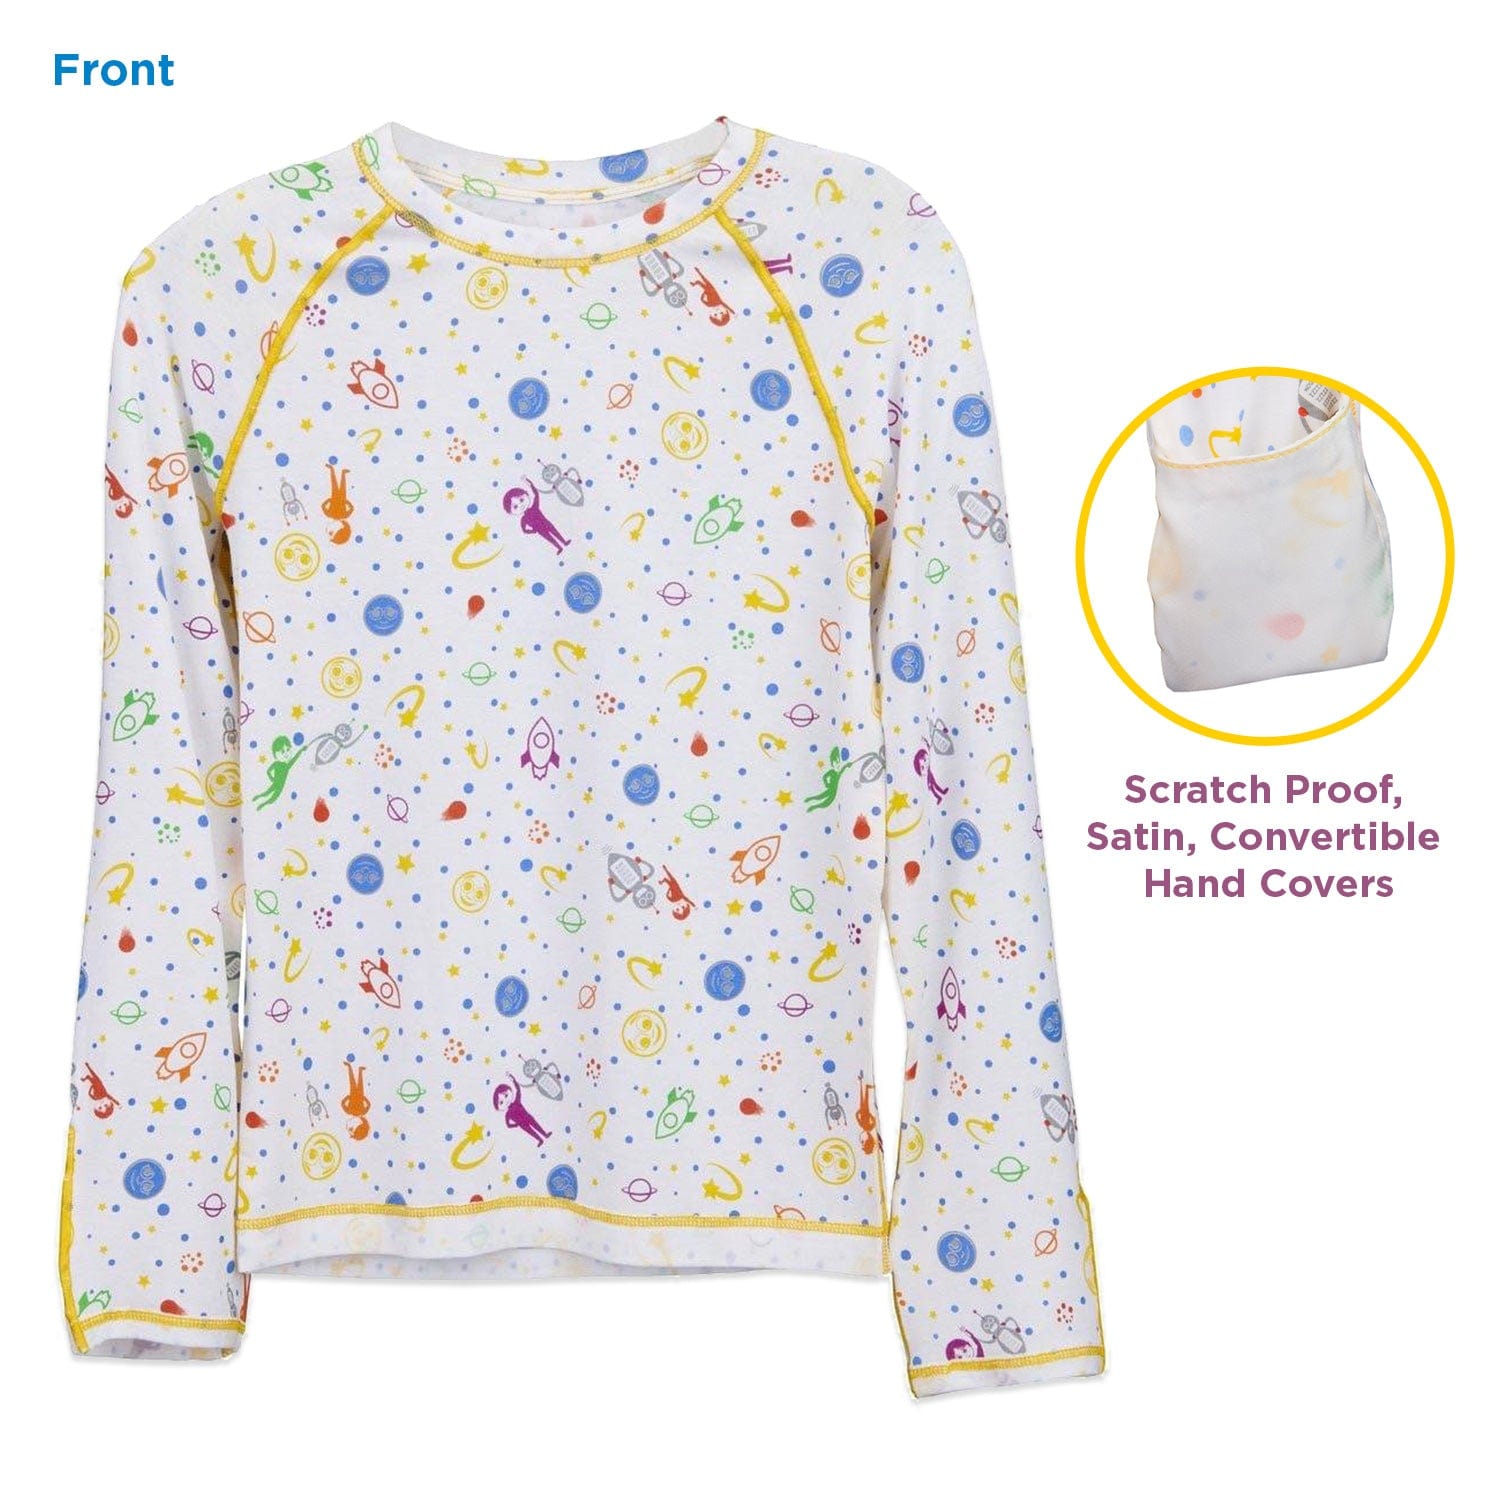 “Eczema Sleepwear and Clothing for kids Stops Scratching with no scratch mittens at Night”